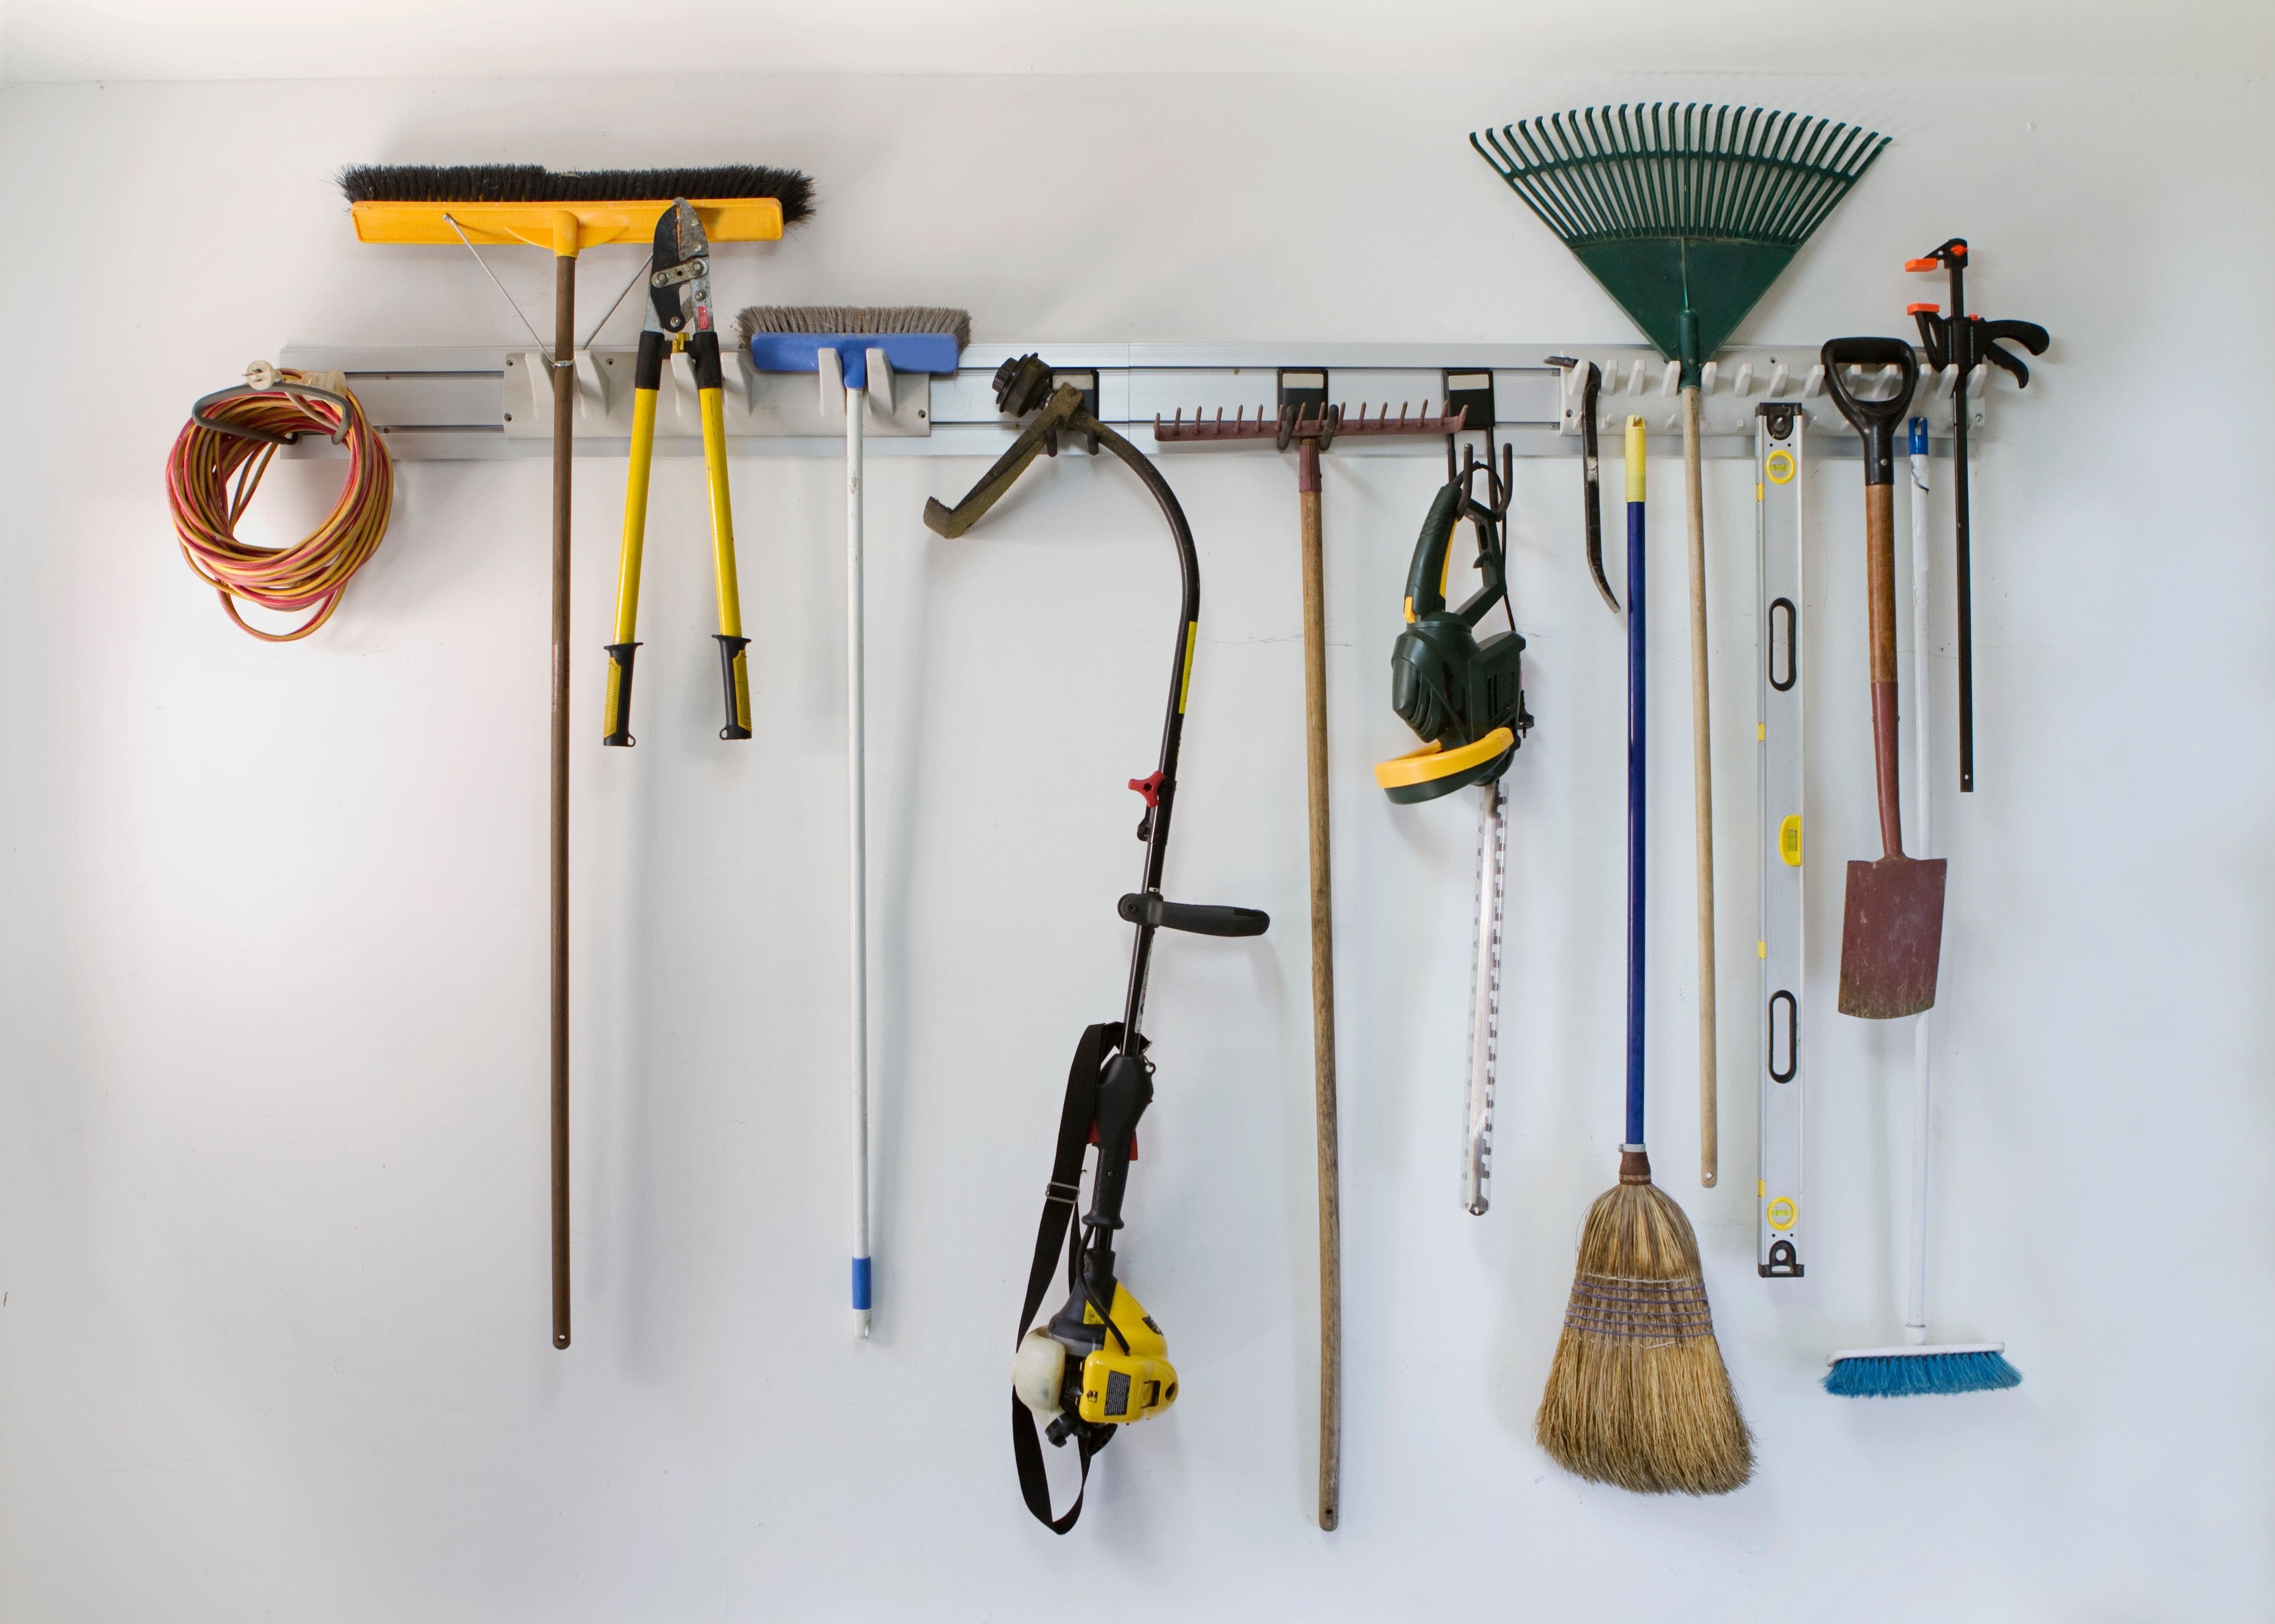 hooks to organize lawn care items inside a garage